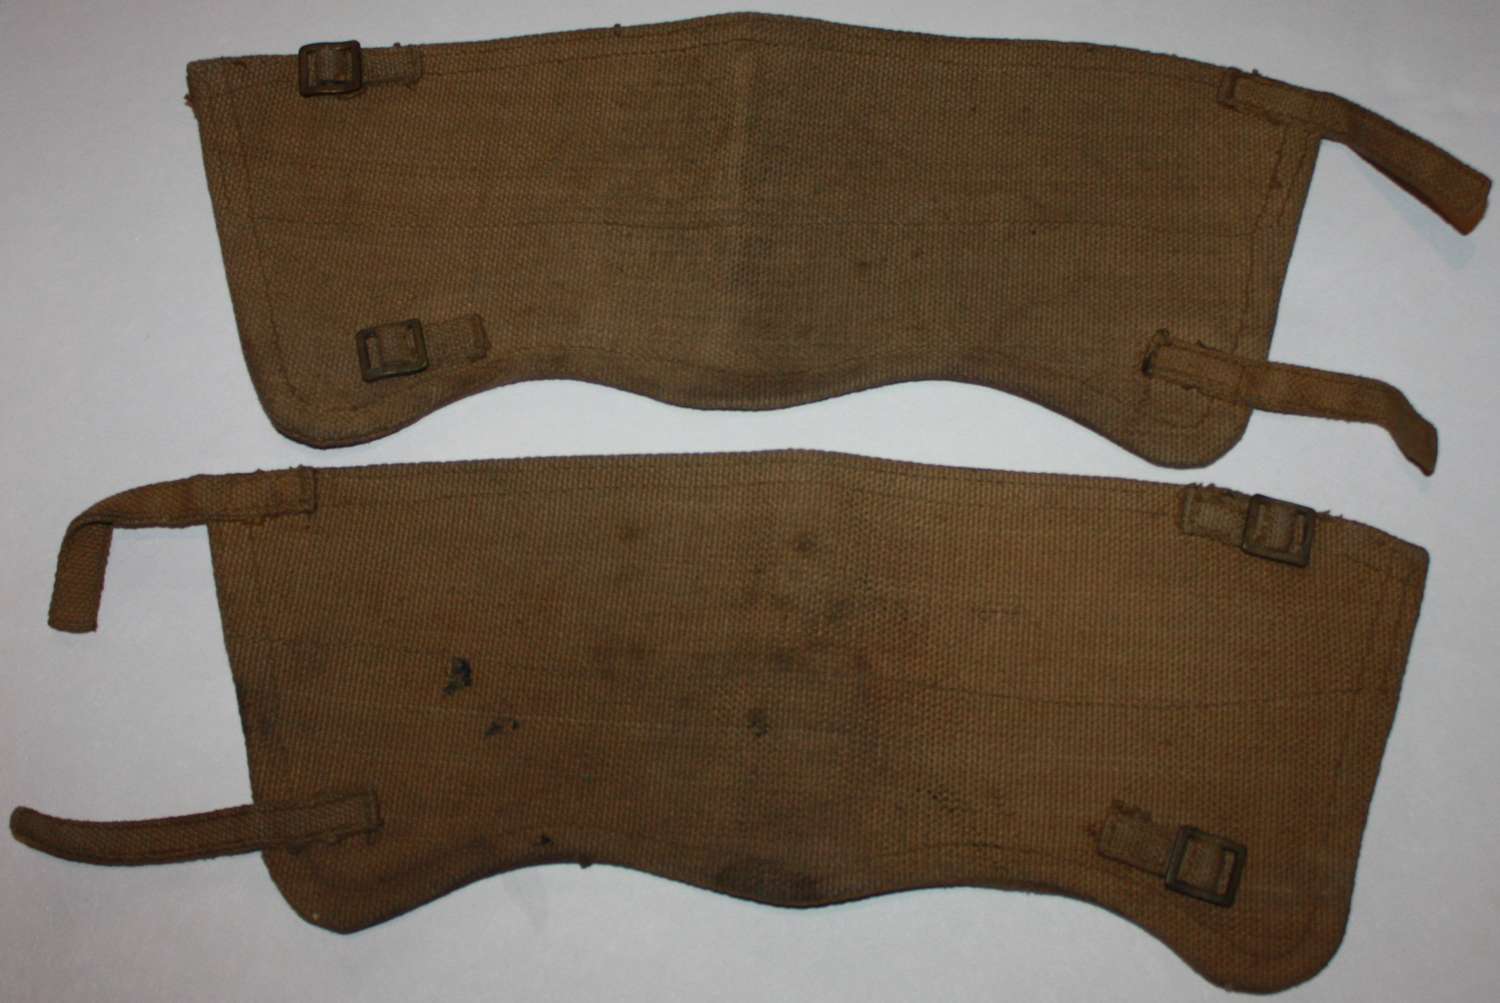 A PAIR OF 1940 USED WEBBING GATTERS